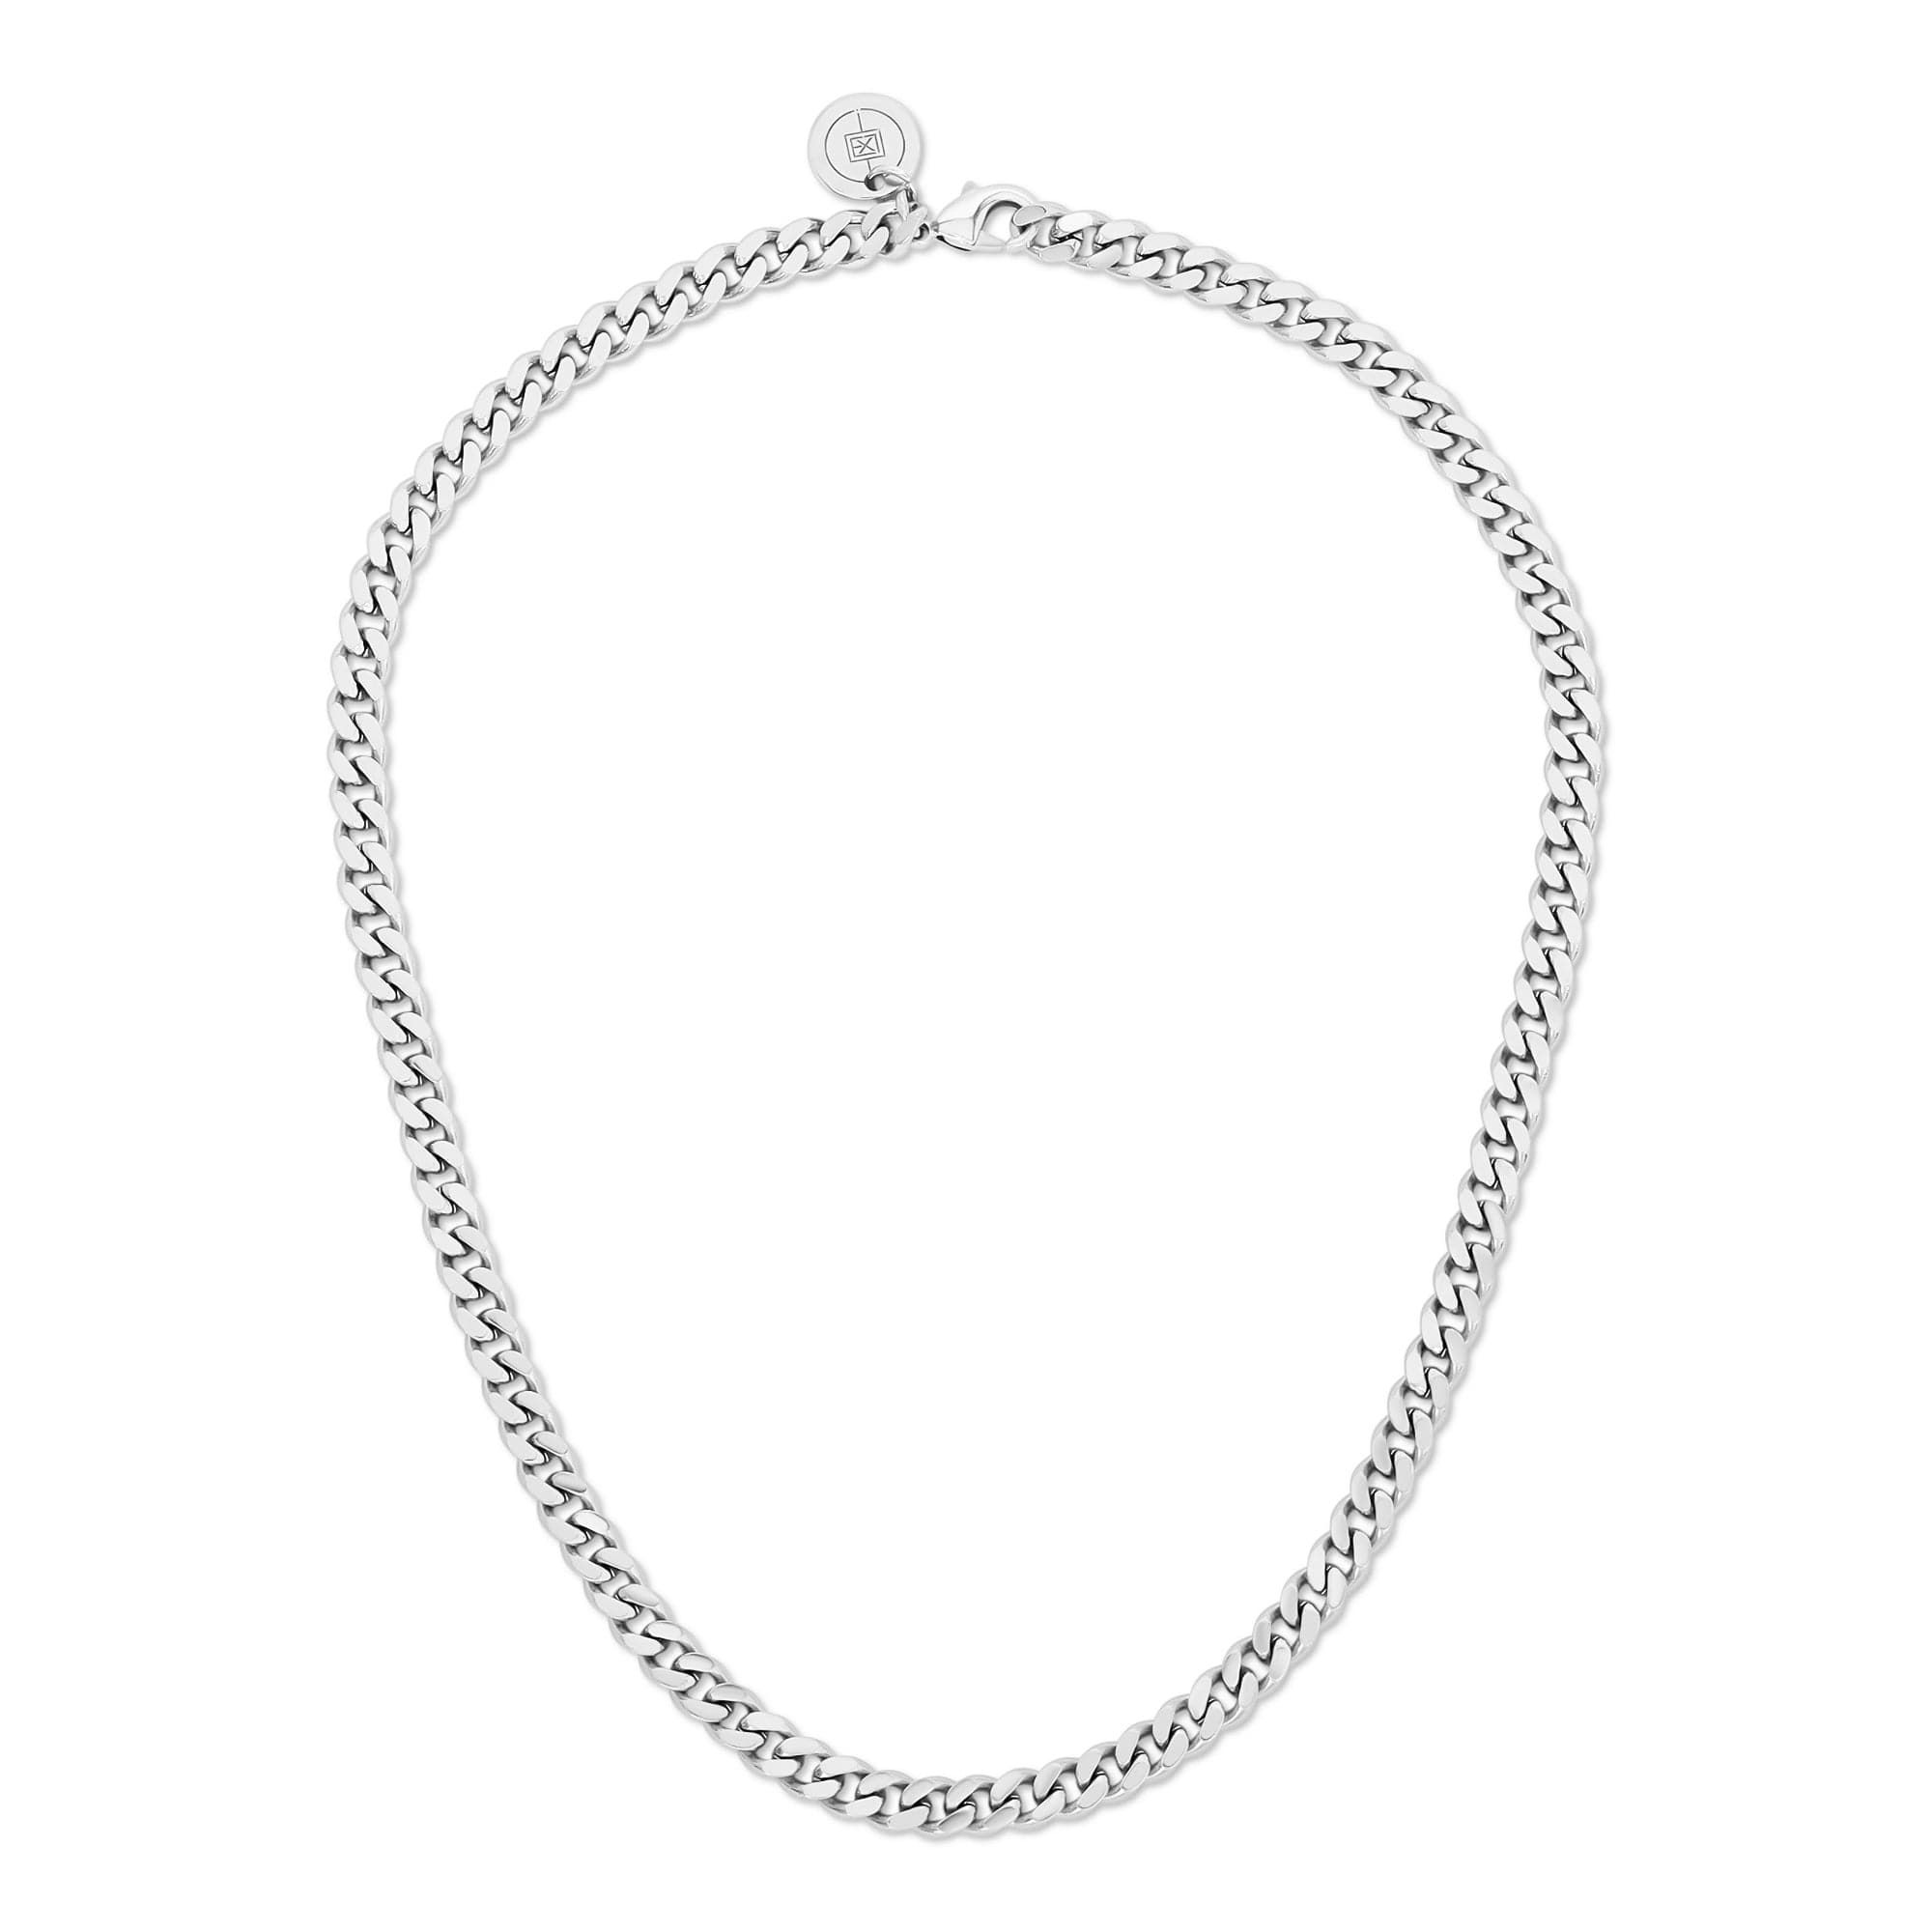 a silver chain with a clasp on a white background